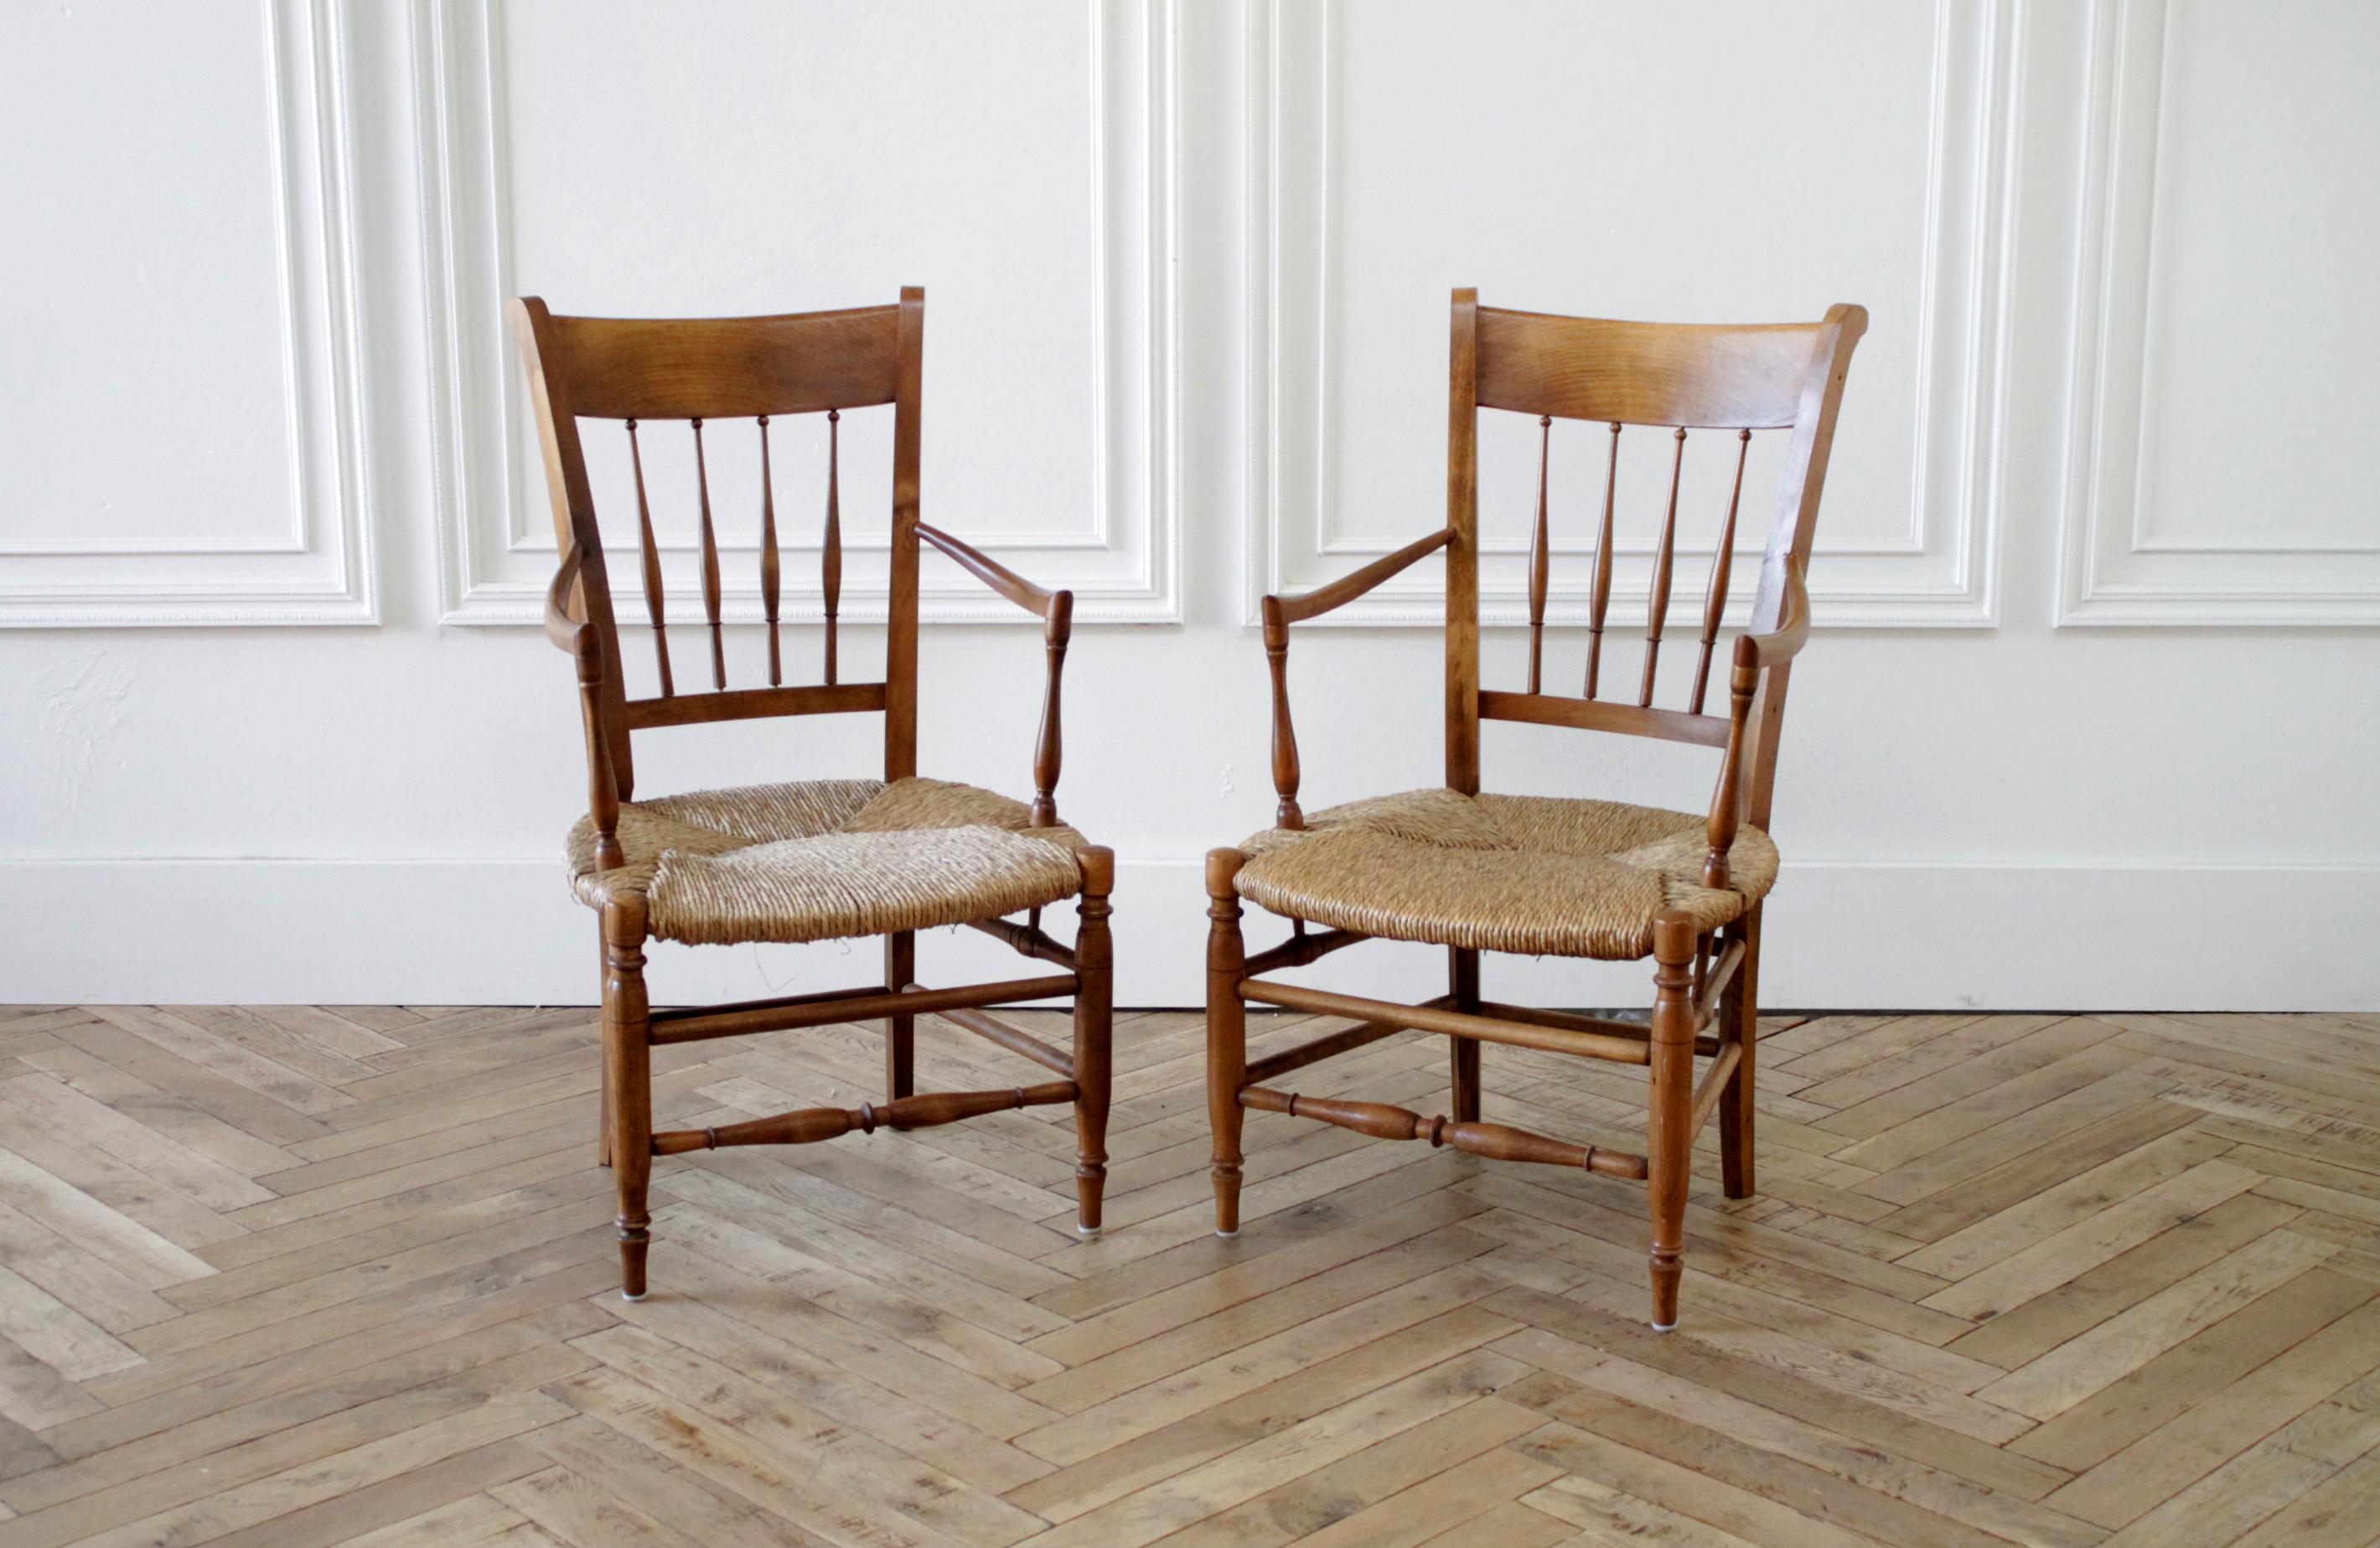 Vintage oak and rush seat armchairs
These are sold as a set of 2, we have 3 sets available. Beautiful light oak, with rush seats, sturdy, can be used anywhere in the house.
Measures: 20